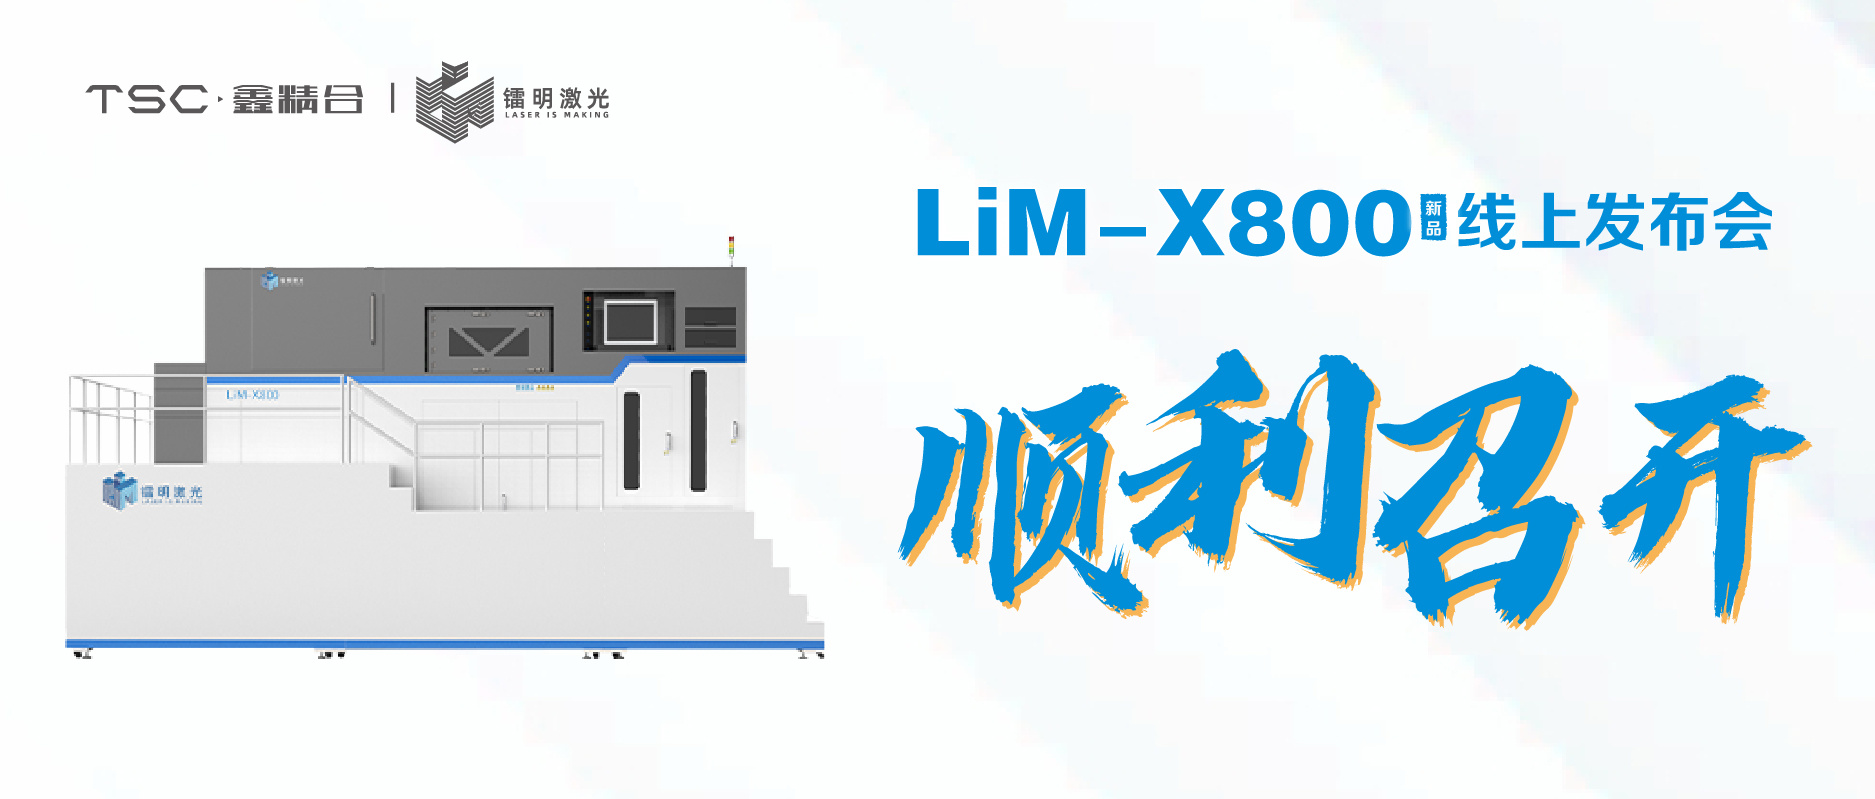 Xin Jinghe-Radium Laser LiM-X800 New Product Online Conference Successfully Concluded